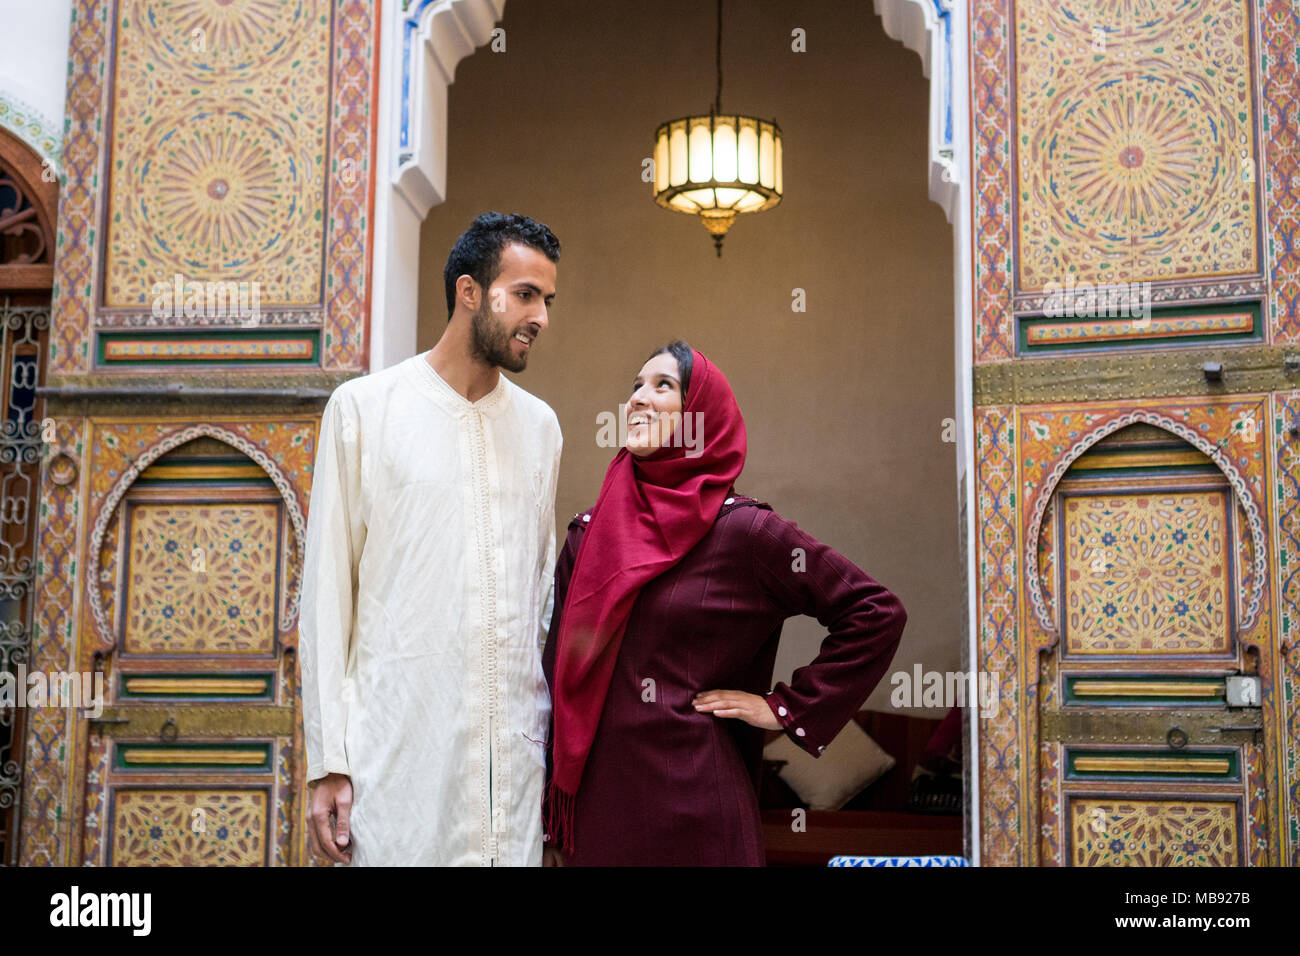 Young Muslim couple in relationship talking and smiling in traditional Moroccan riad house Stock Photo